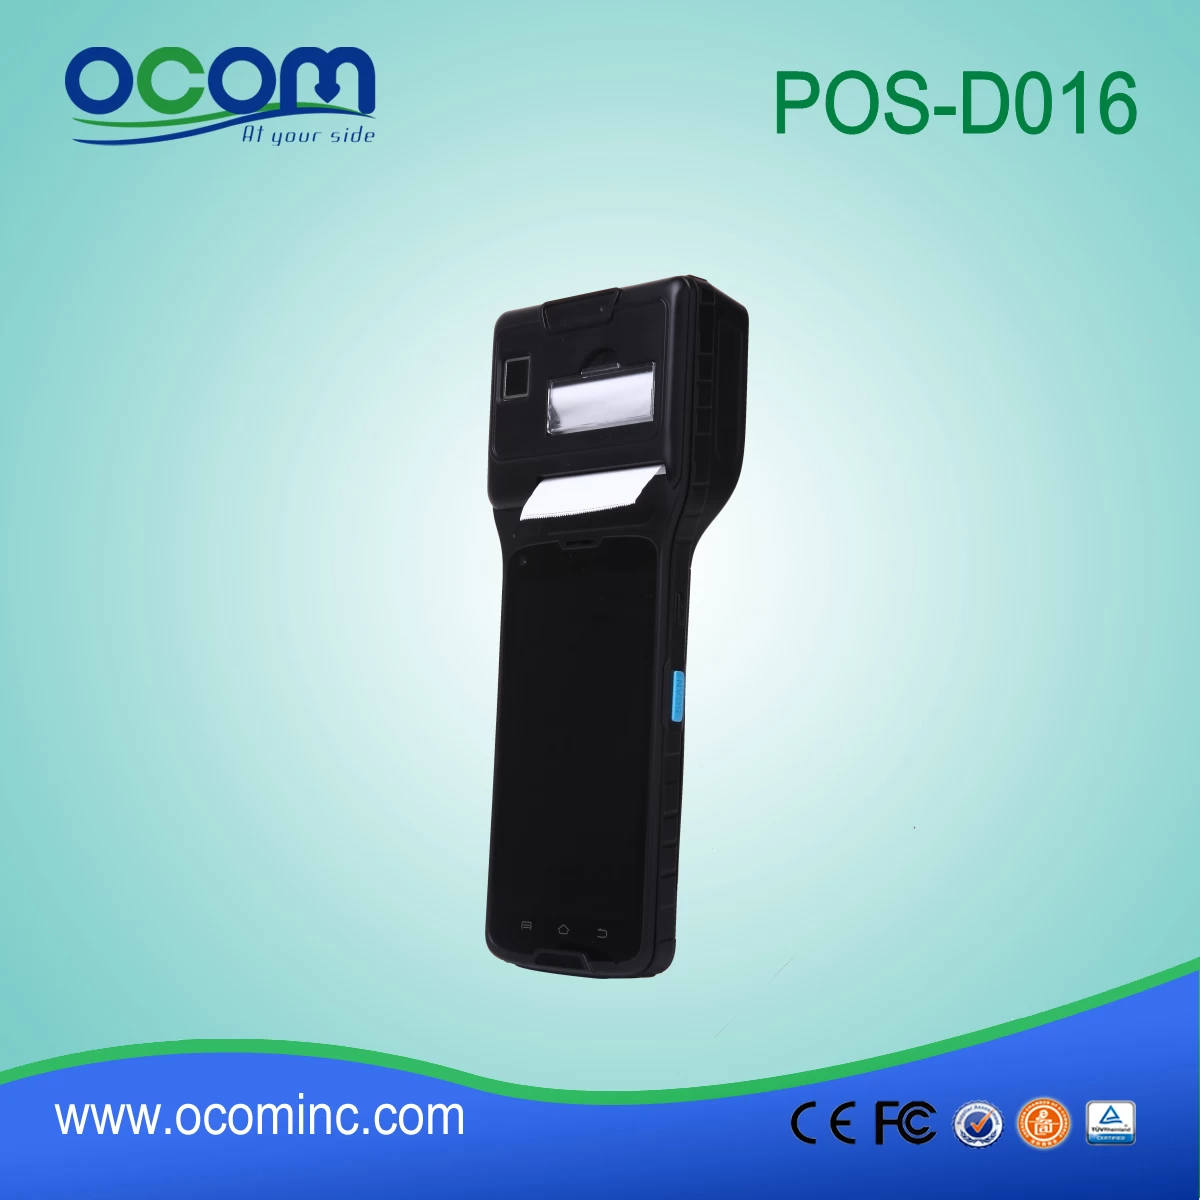 (OCBS-D016) Smart Handheld Android Terminal With Thermal Printer